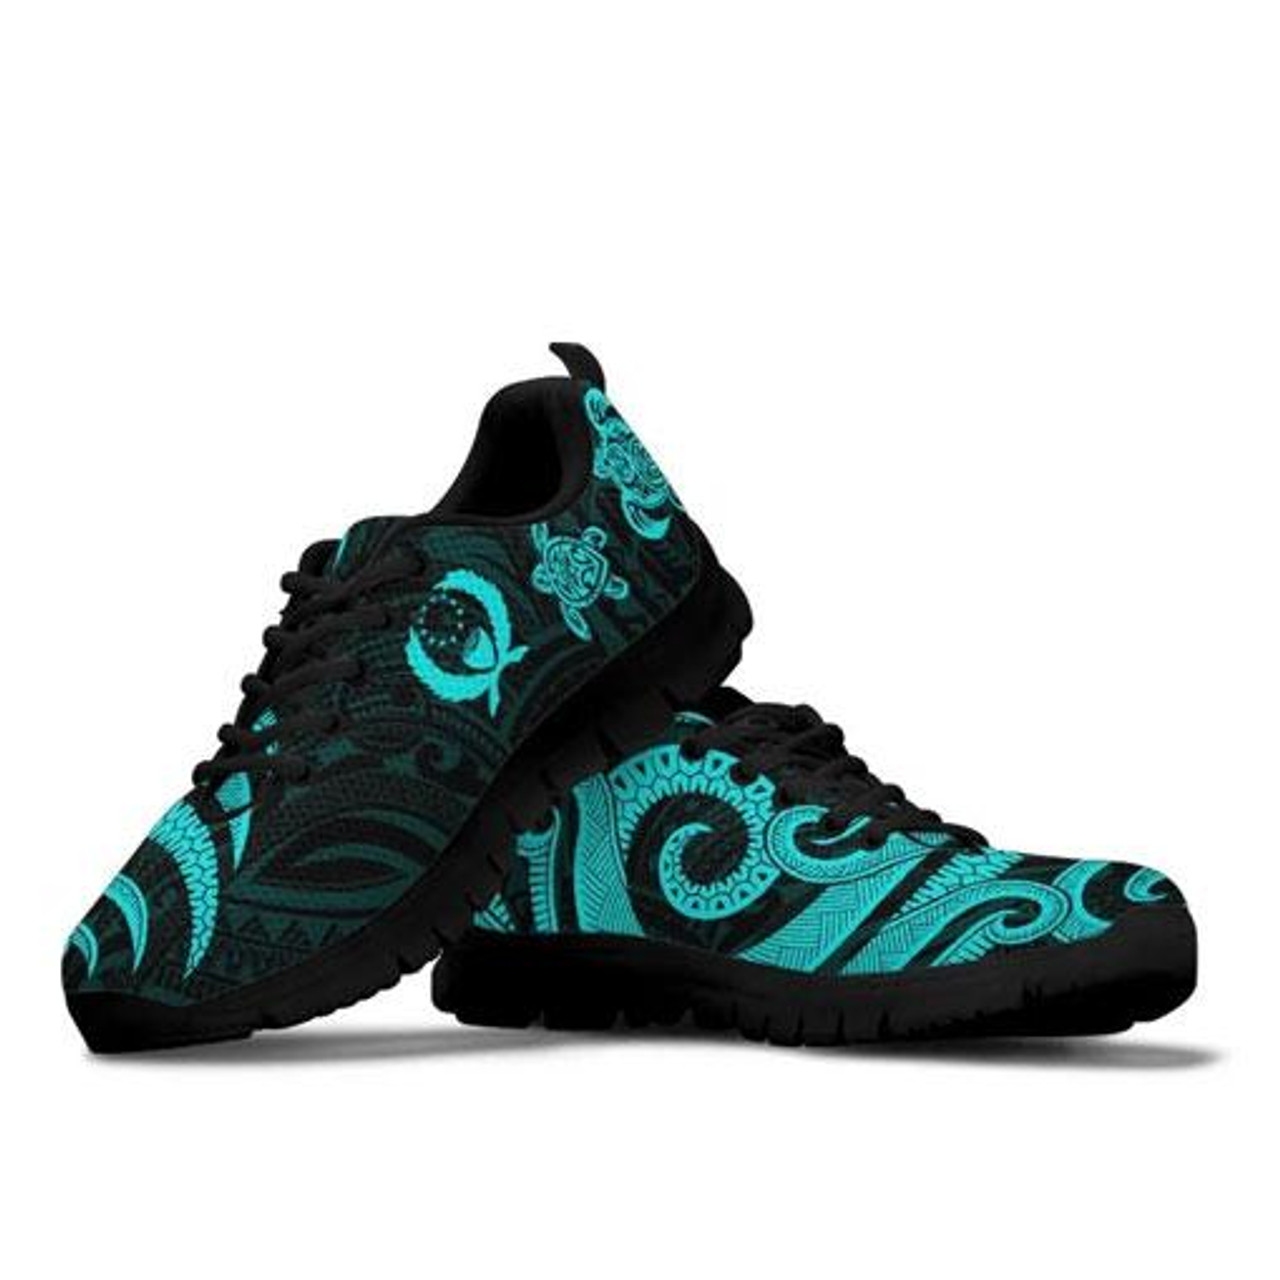 Pohnpei Micronesian Sneakers - Turquoise Tentacle Turtle 2